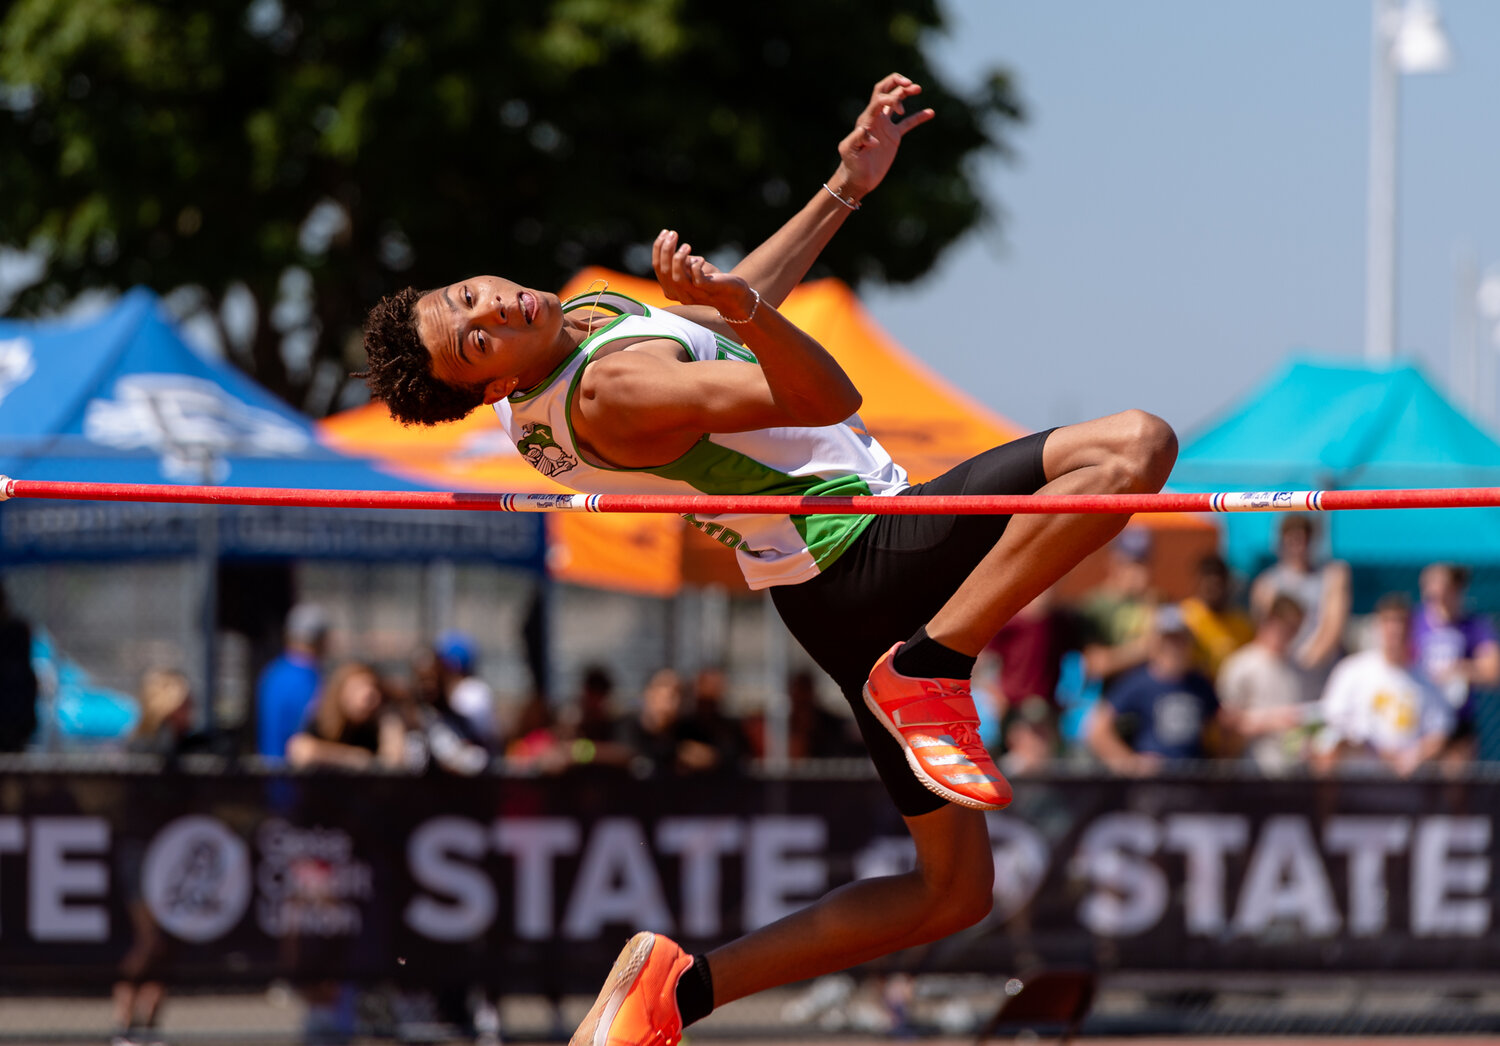 Tumwater’s Jayden Thomas bends backward to clear the bar during the 2A boys high jump at the WIAA 2A/3A/4A State Track and Field Championships on Friday, May 26, 2023, at Mount Tahoma High School in Tacoma. (Joshua Hart/For The Chronicle)